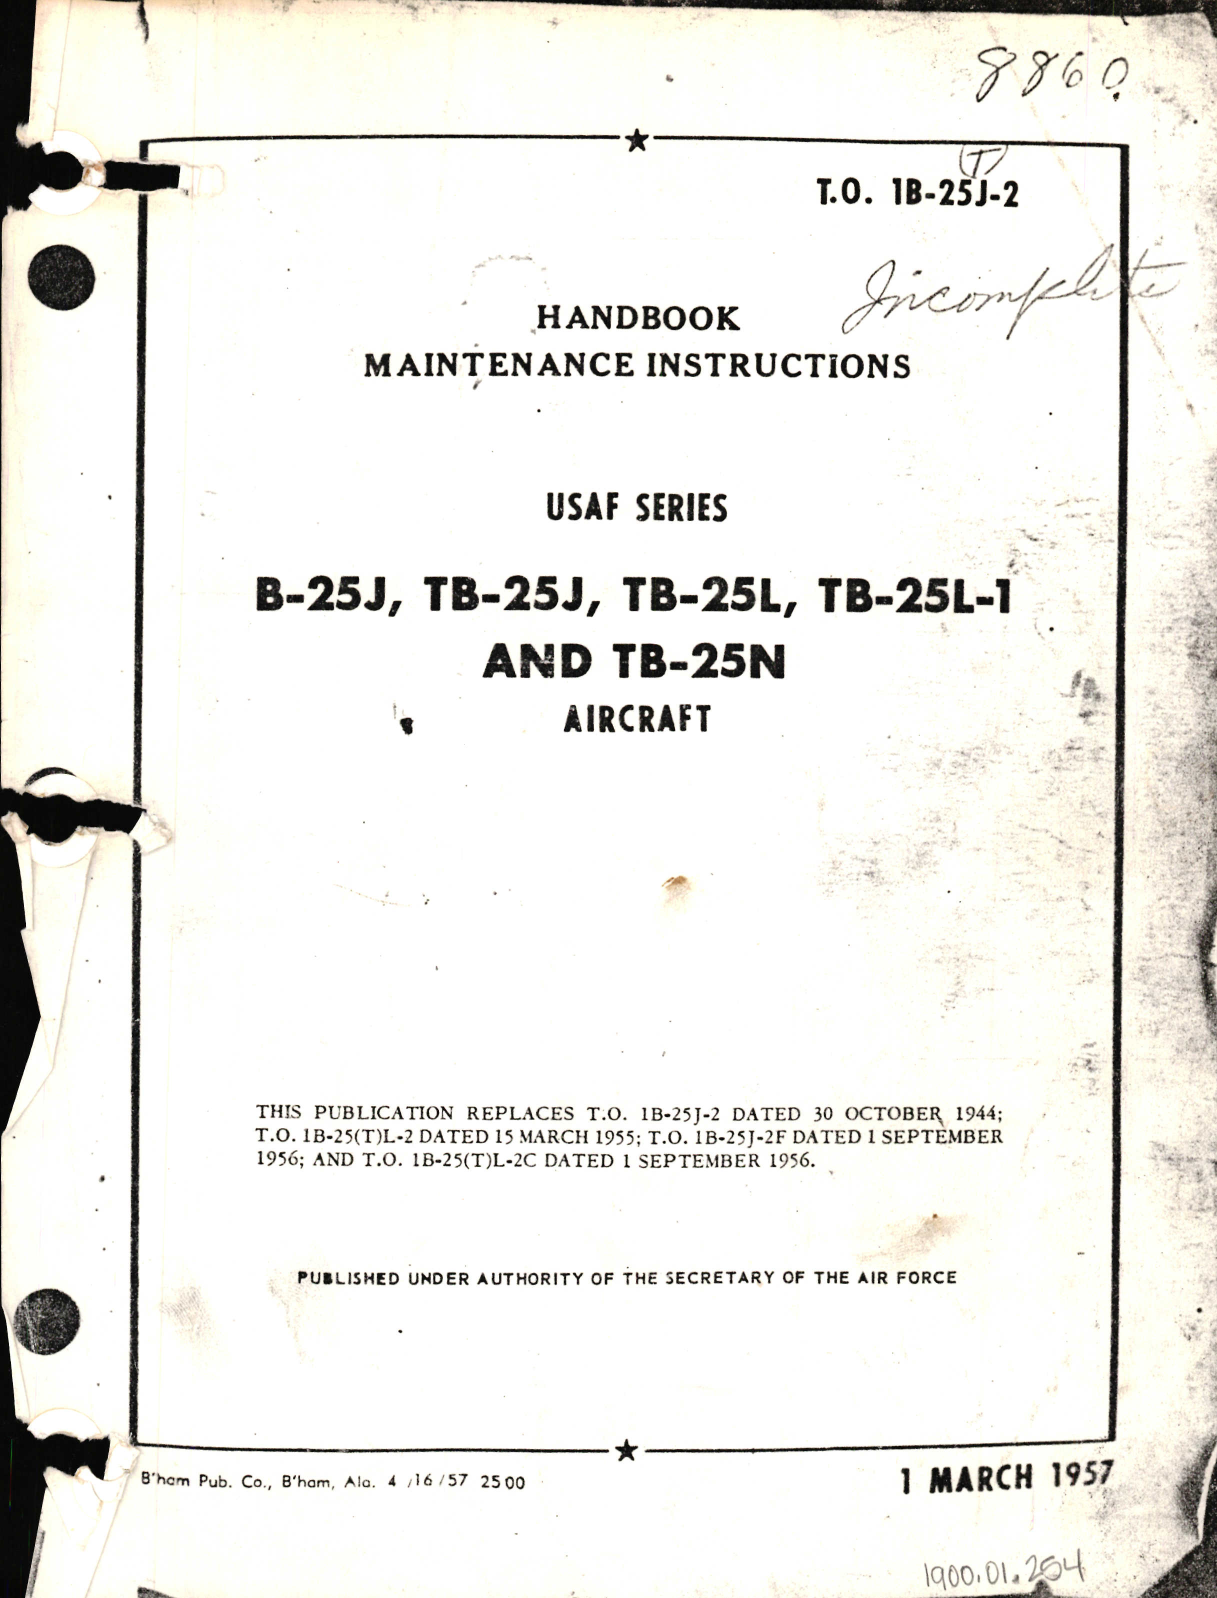 Sample page 1 from AirCorps Library document: Maintenance Instructions for B-25J, TB-25J, TB-25L, TB-25L-1, and TB-25N